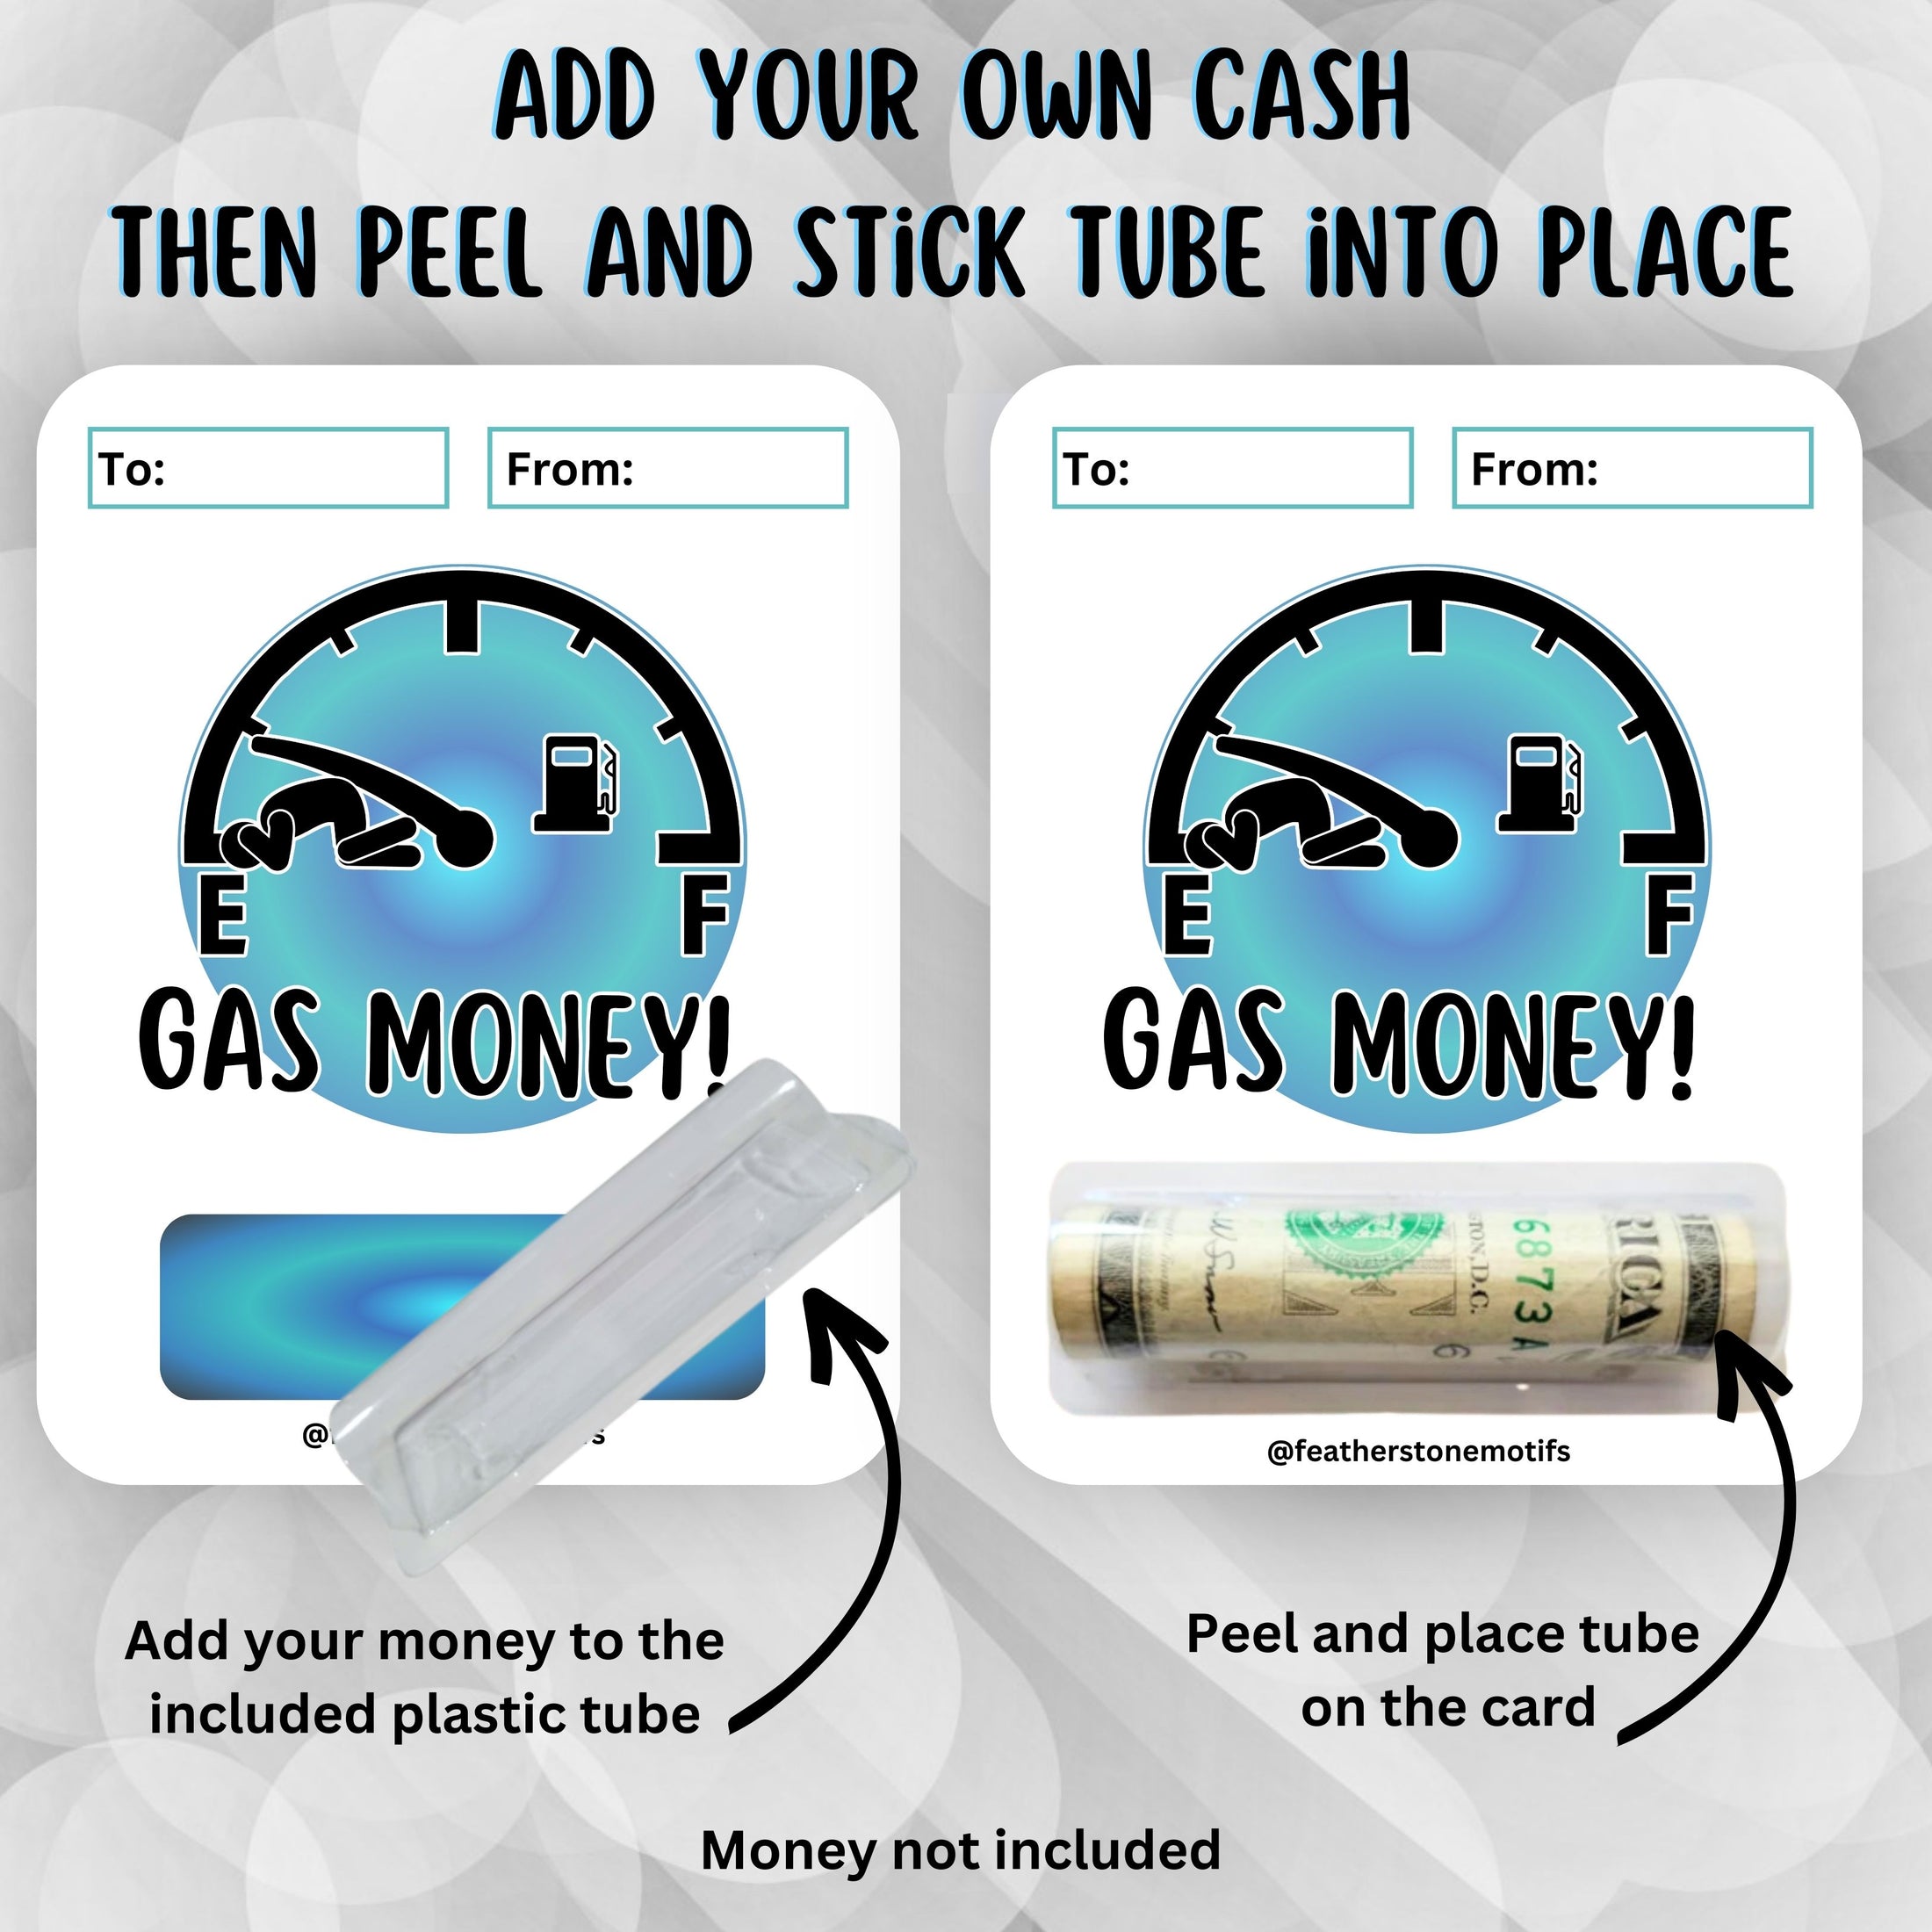 This image shows how to attach the money tube to the Gas Money 1 Money Card.